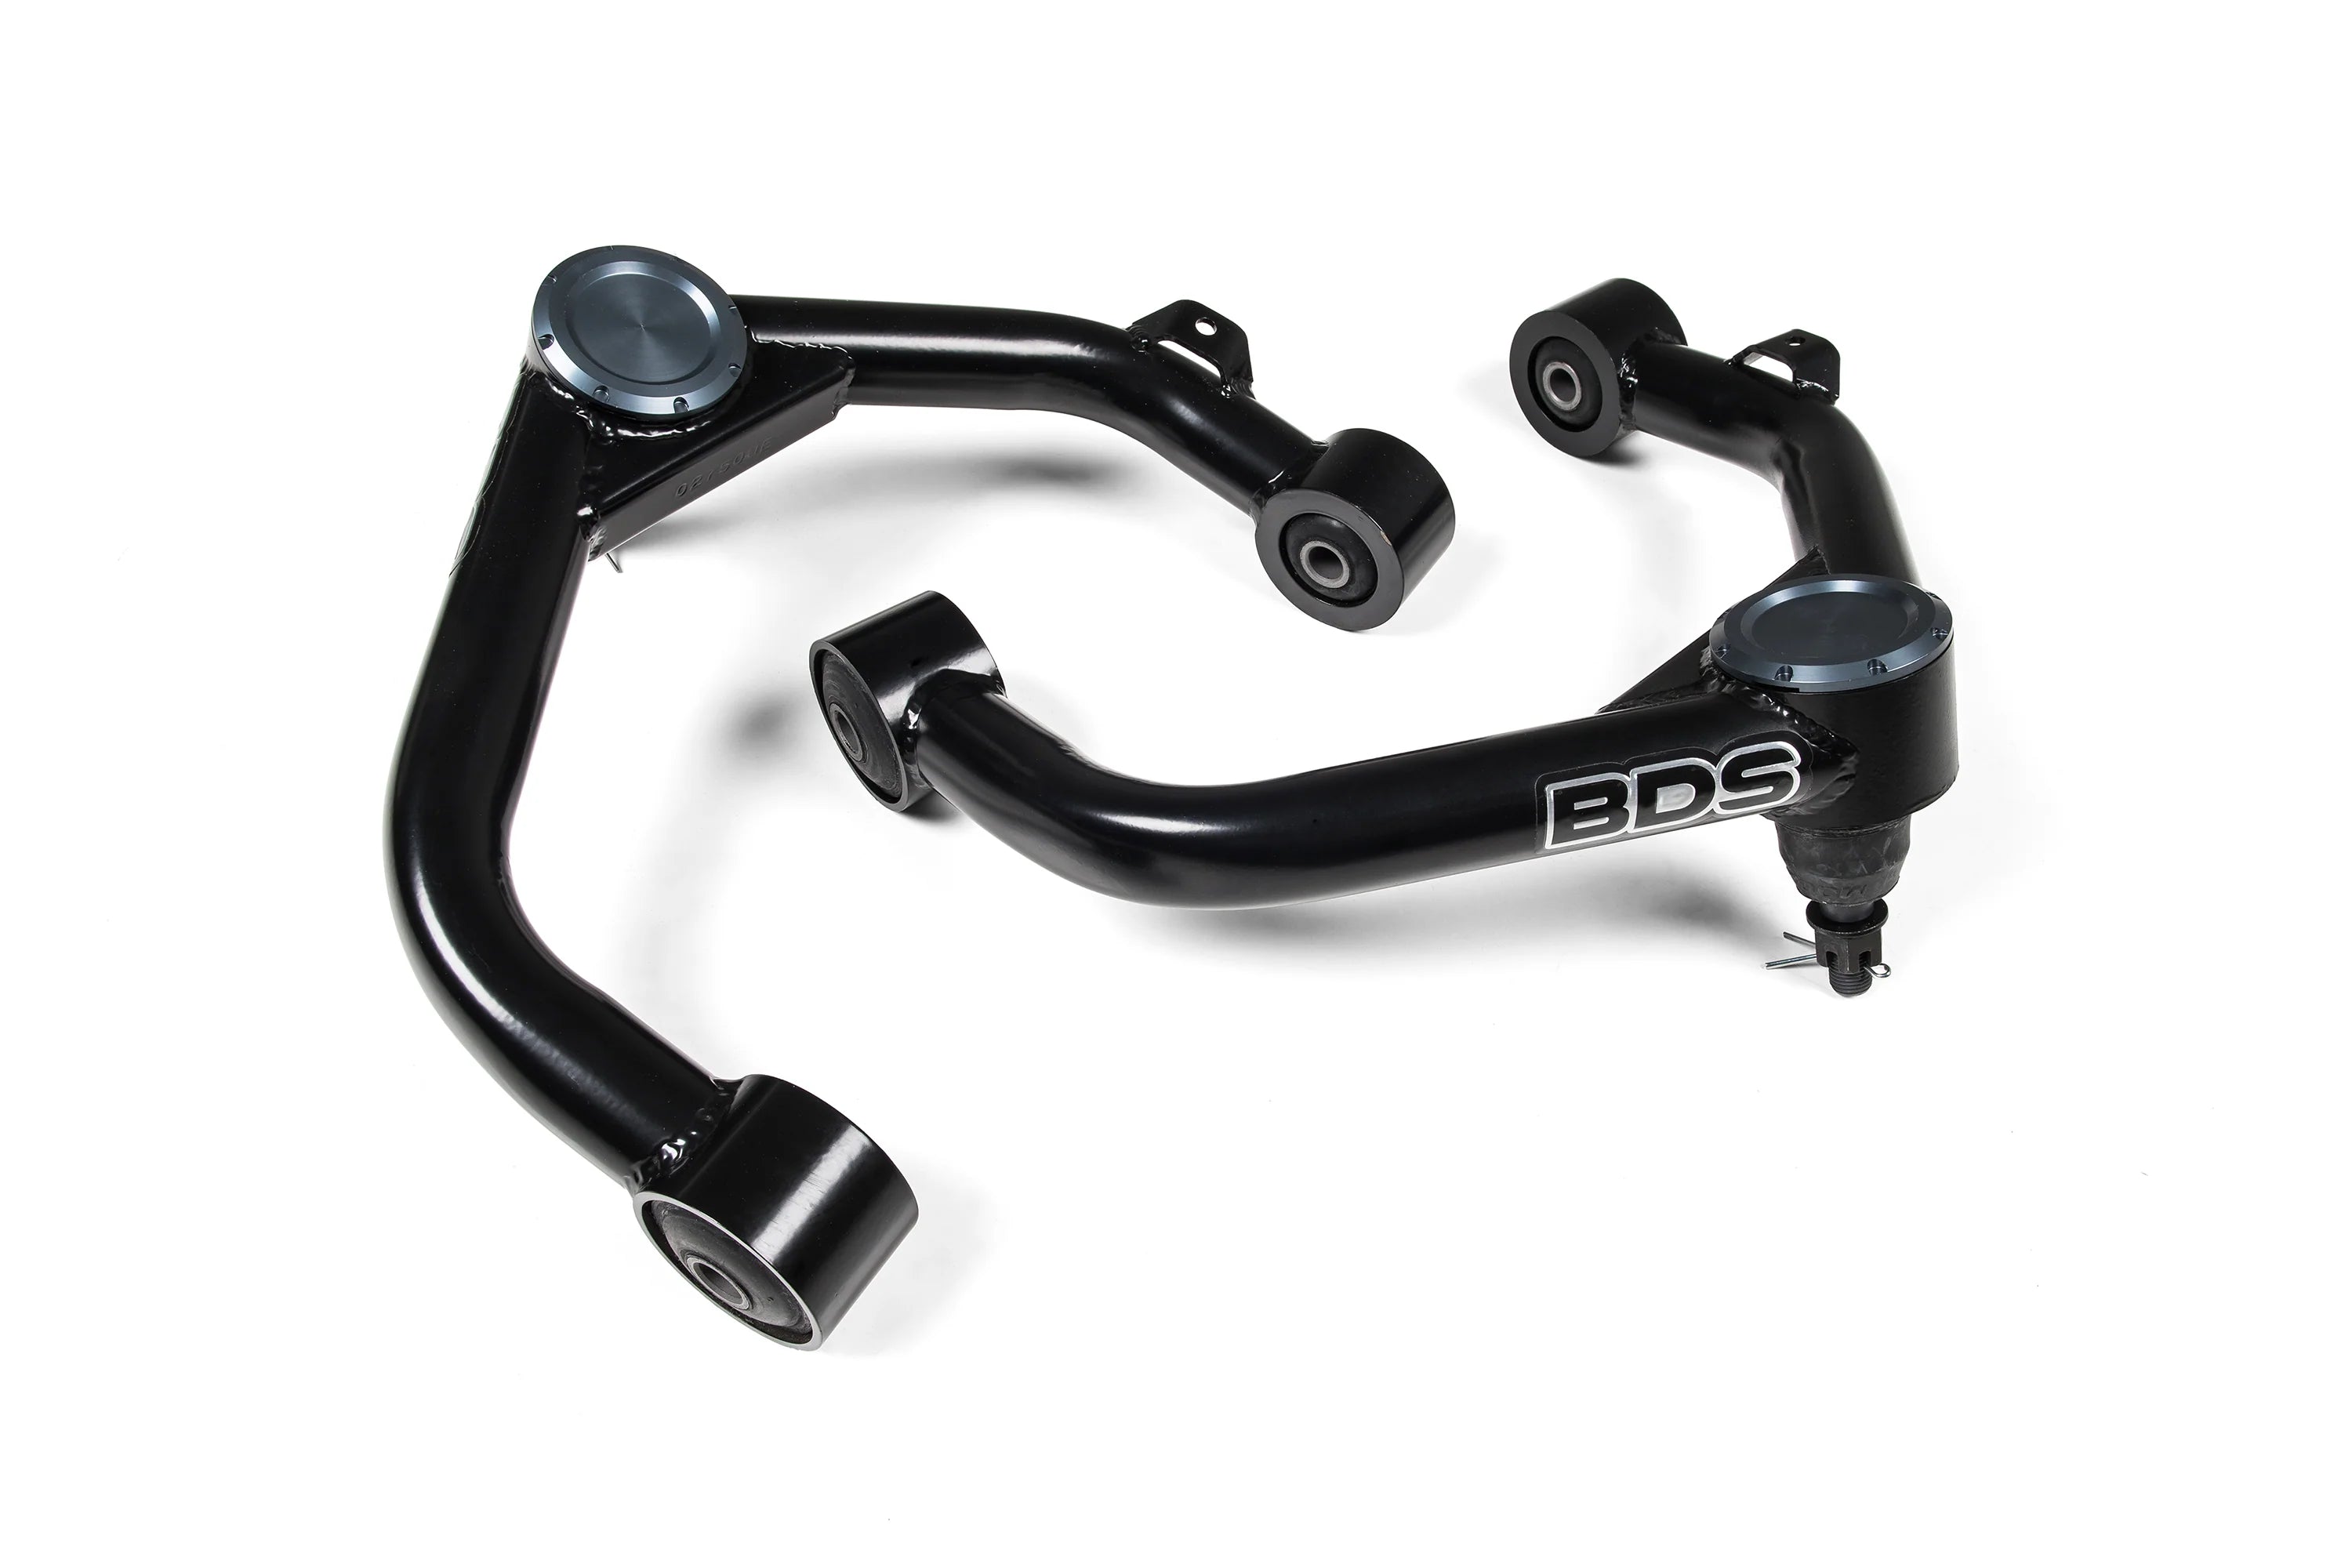 2013+ Upper Control Arm Kit for Ram 1500 DT/DS - Outback Kitters